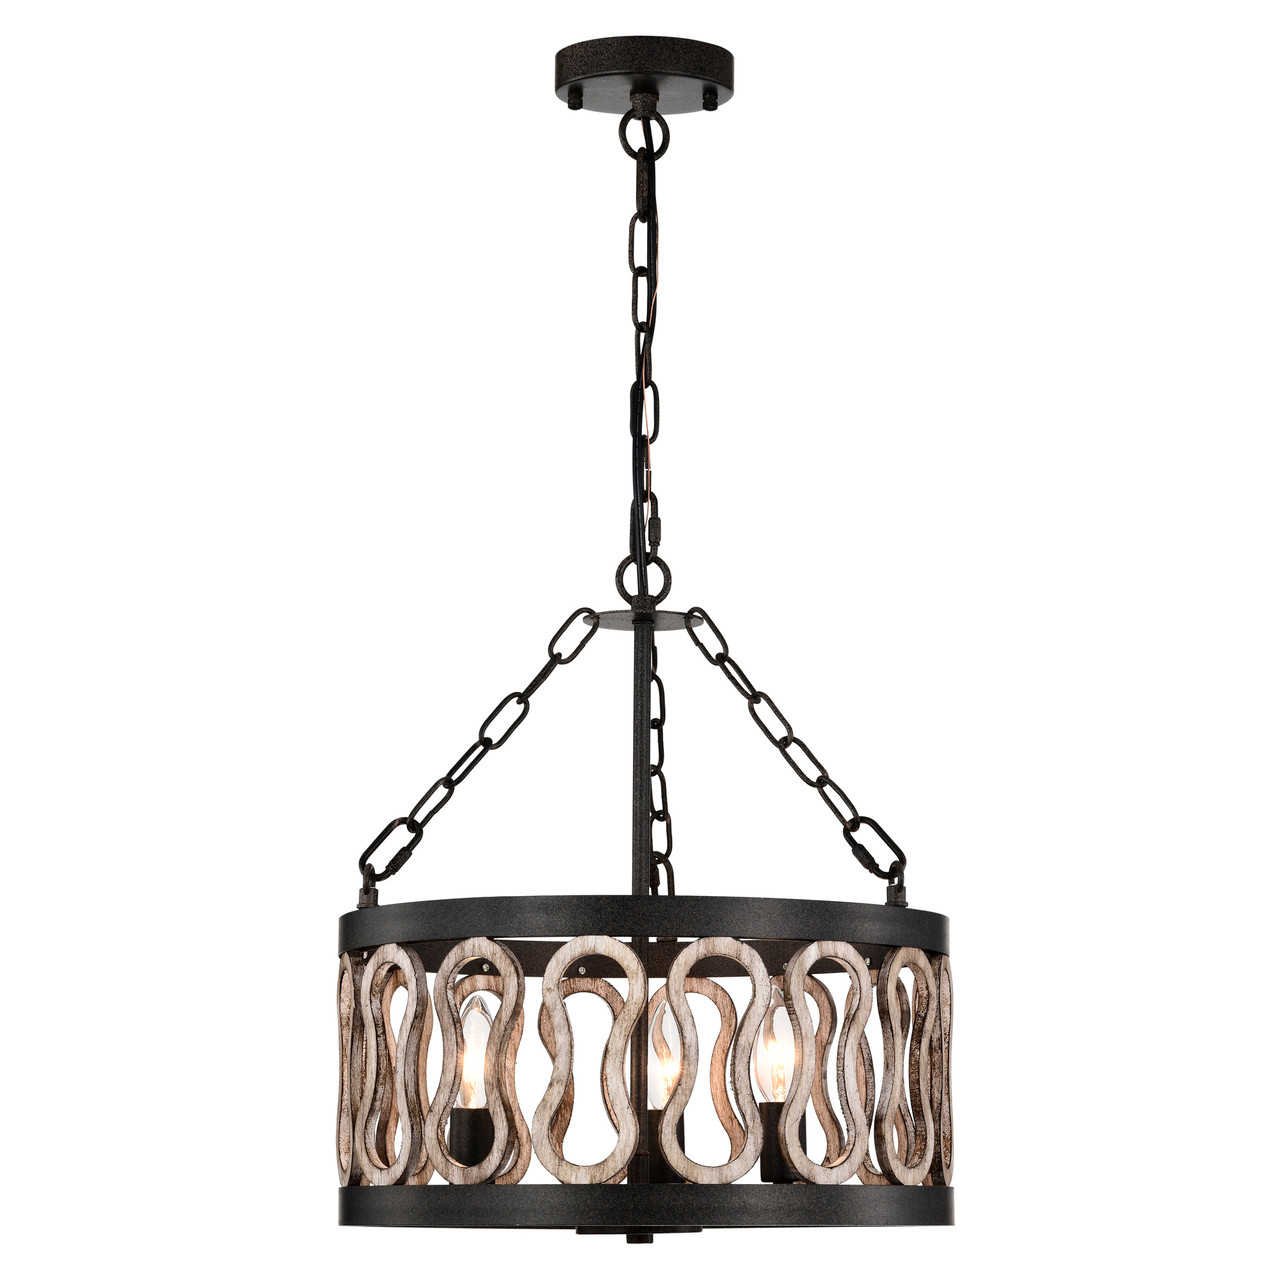 WAREHOUSE OF TIFFANY'S PD037/3 Dalen 16 in. 3-Light Indoor Rustic Black and Faux Wood Grain Finish Chandelier with Light Kit